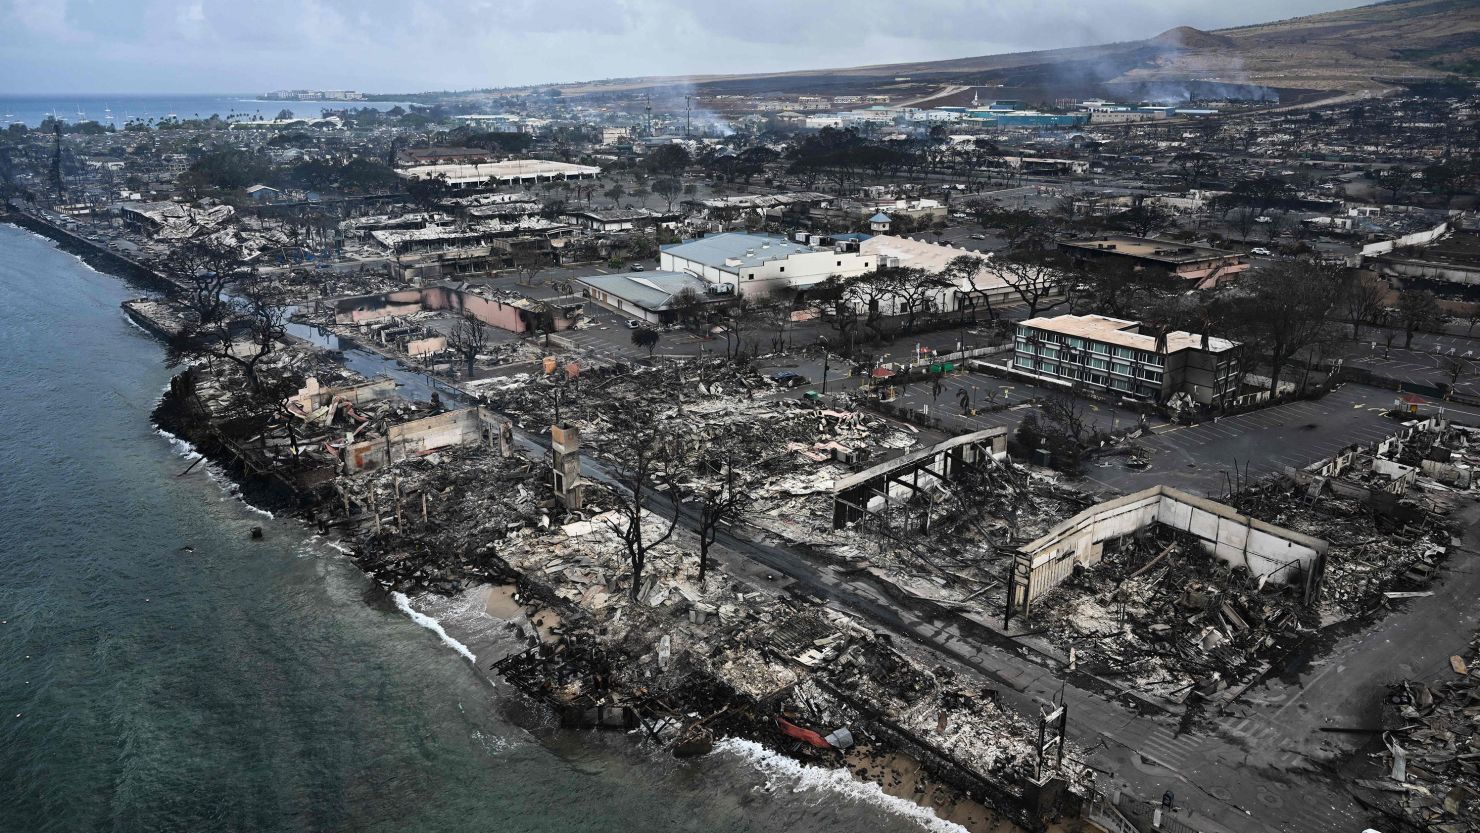 Destroyed homes and buildings on the waterfront in Lahaina on August 10 in the aftermath of wildfires on Maui.